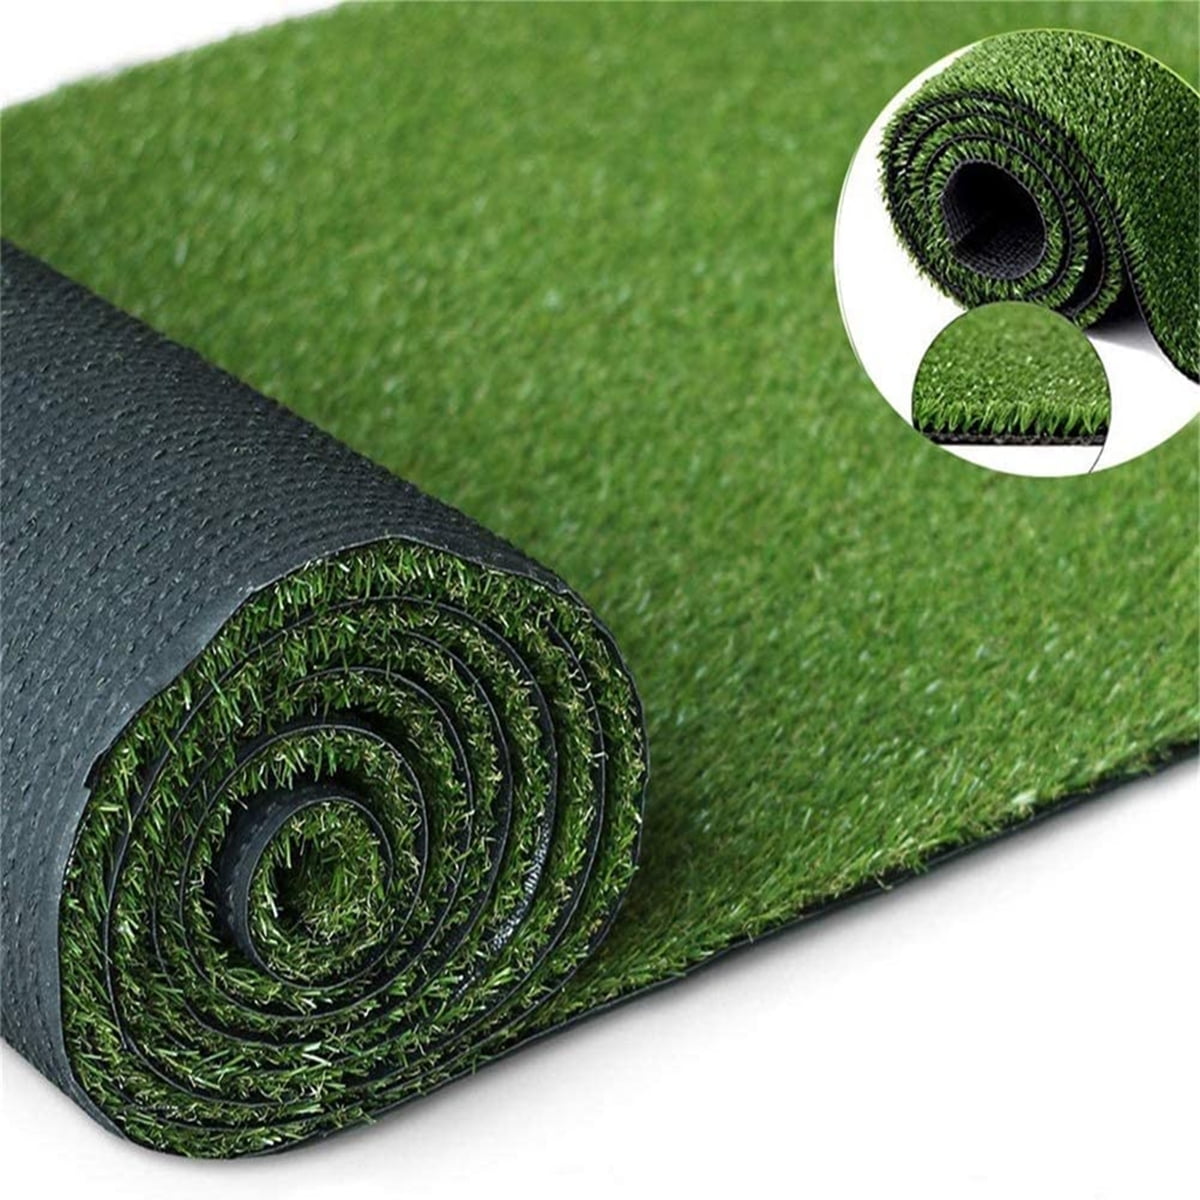 Grass Rug Synthetic Lawn Standard Green 400x280 cm 